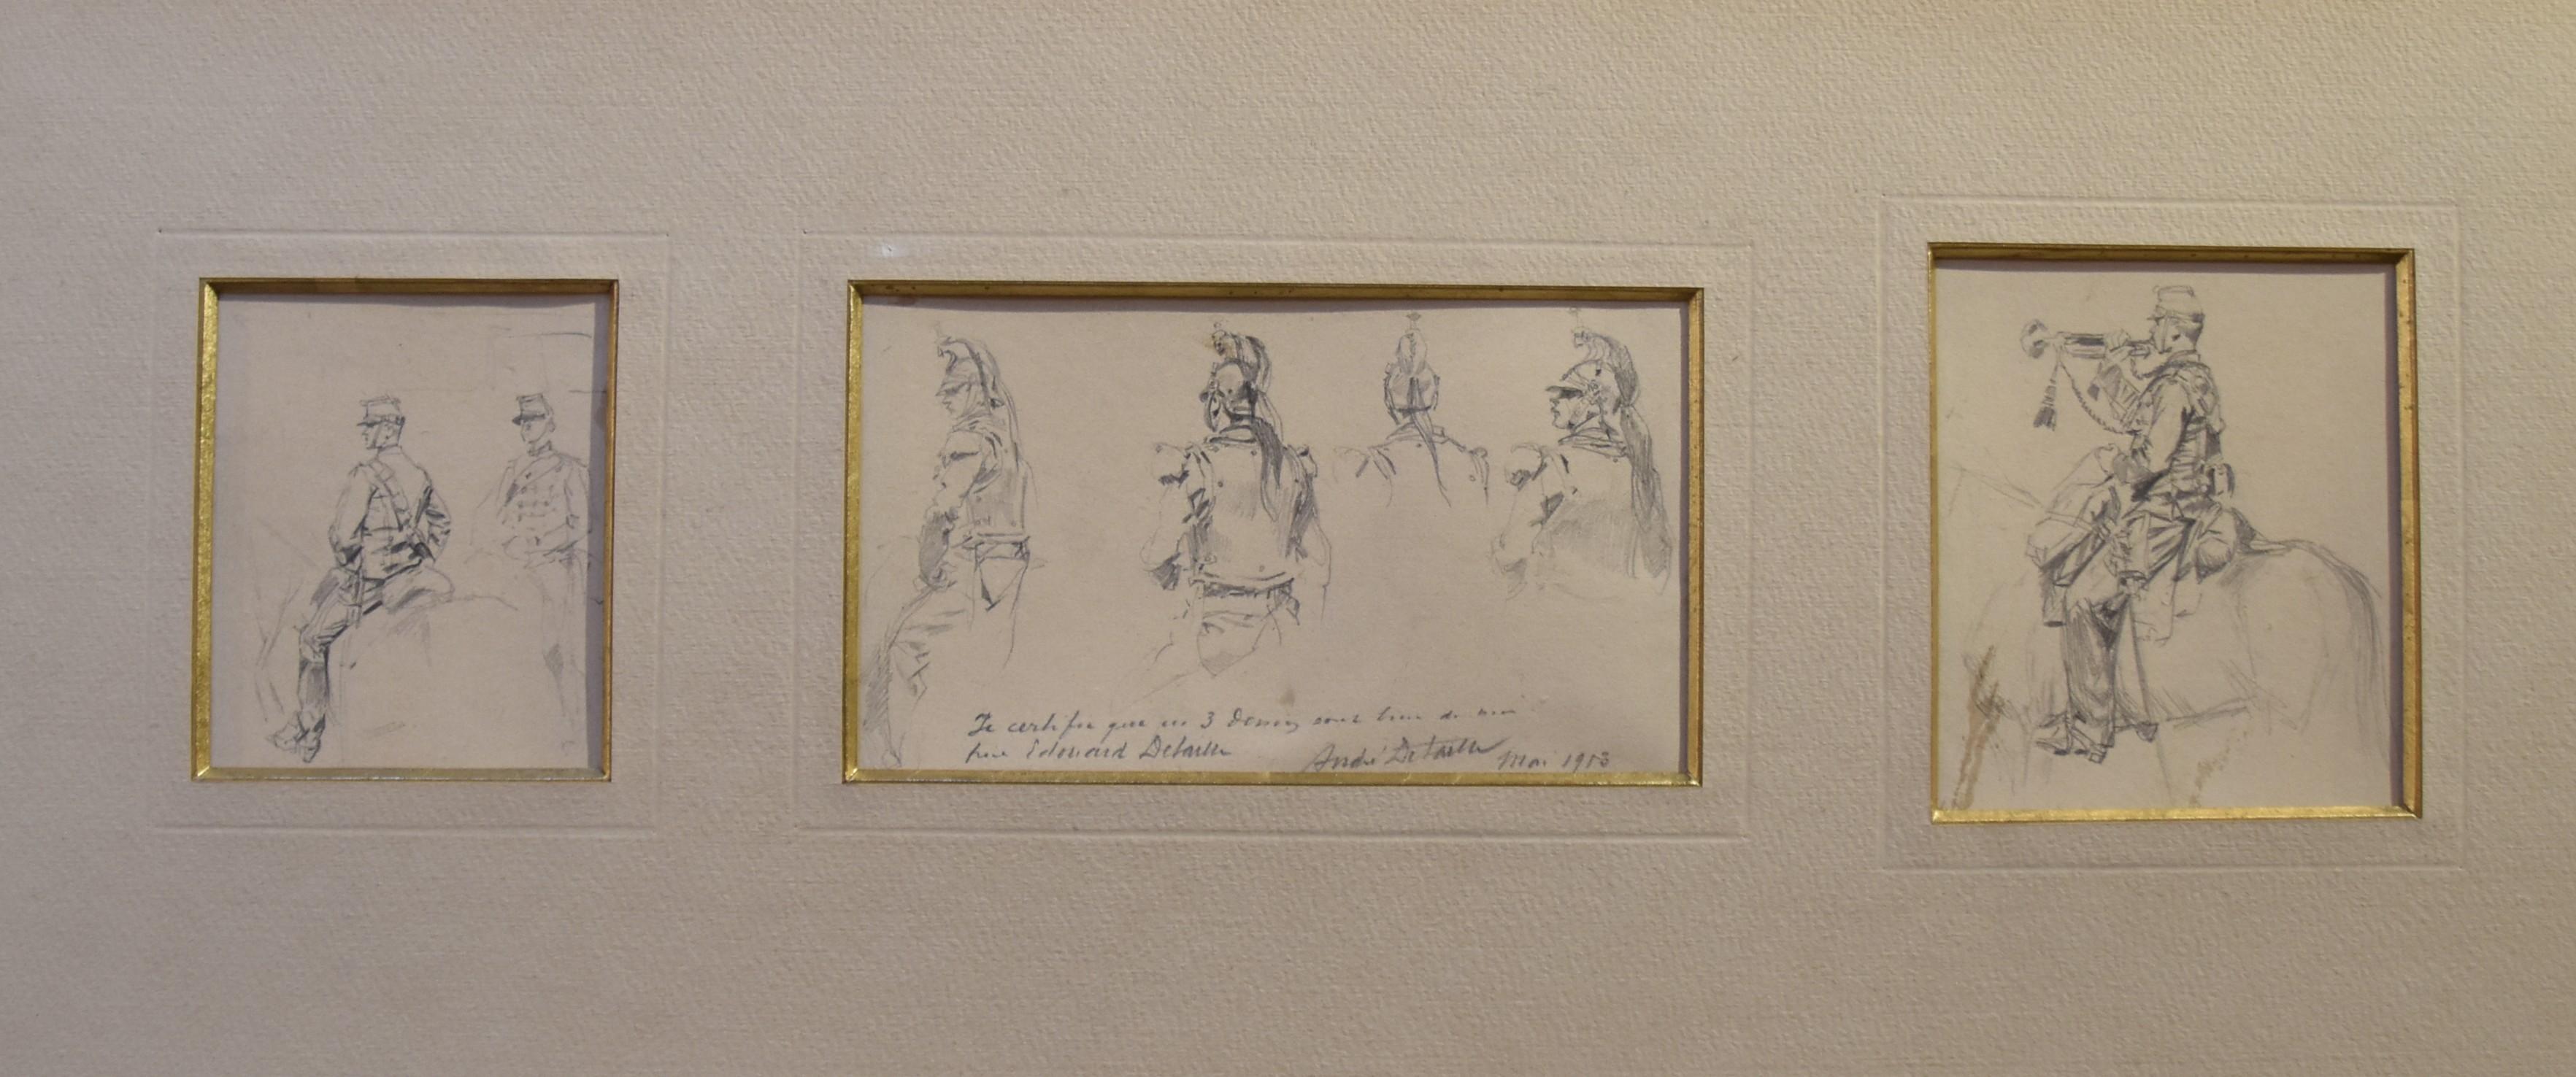 Edouard Detaille (1848-1912)
Three studies of different type of horse soldiers in the same mount
8 x 6.7 cm
8 x 14 cm
9.5 x 8 cm
Pencil on paper
The biggest one is inscribed by the hand of the artist's son 